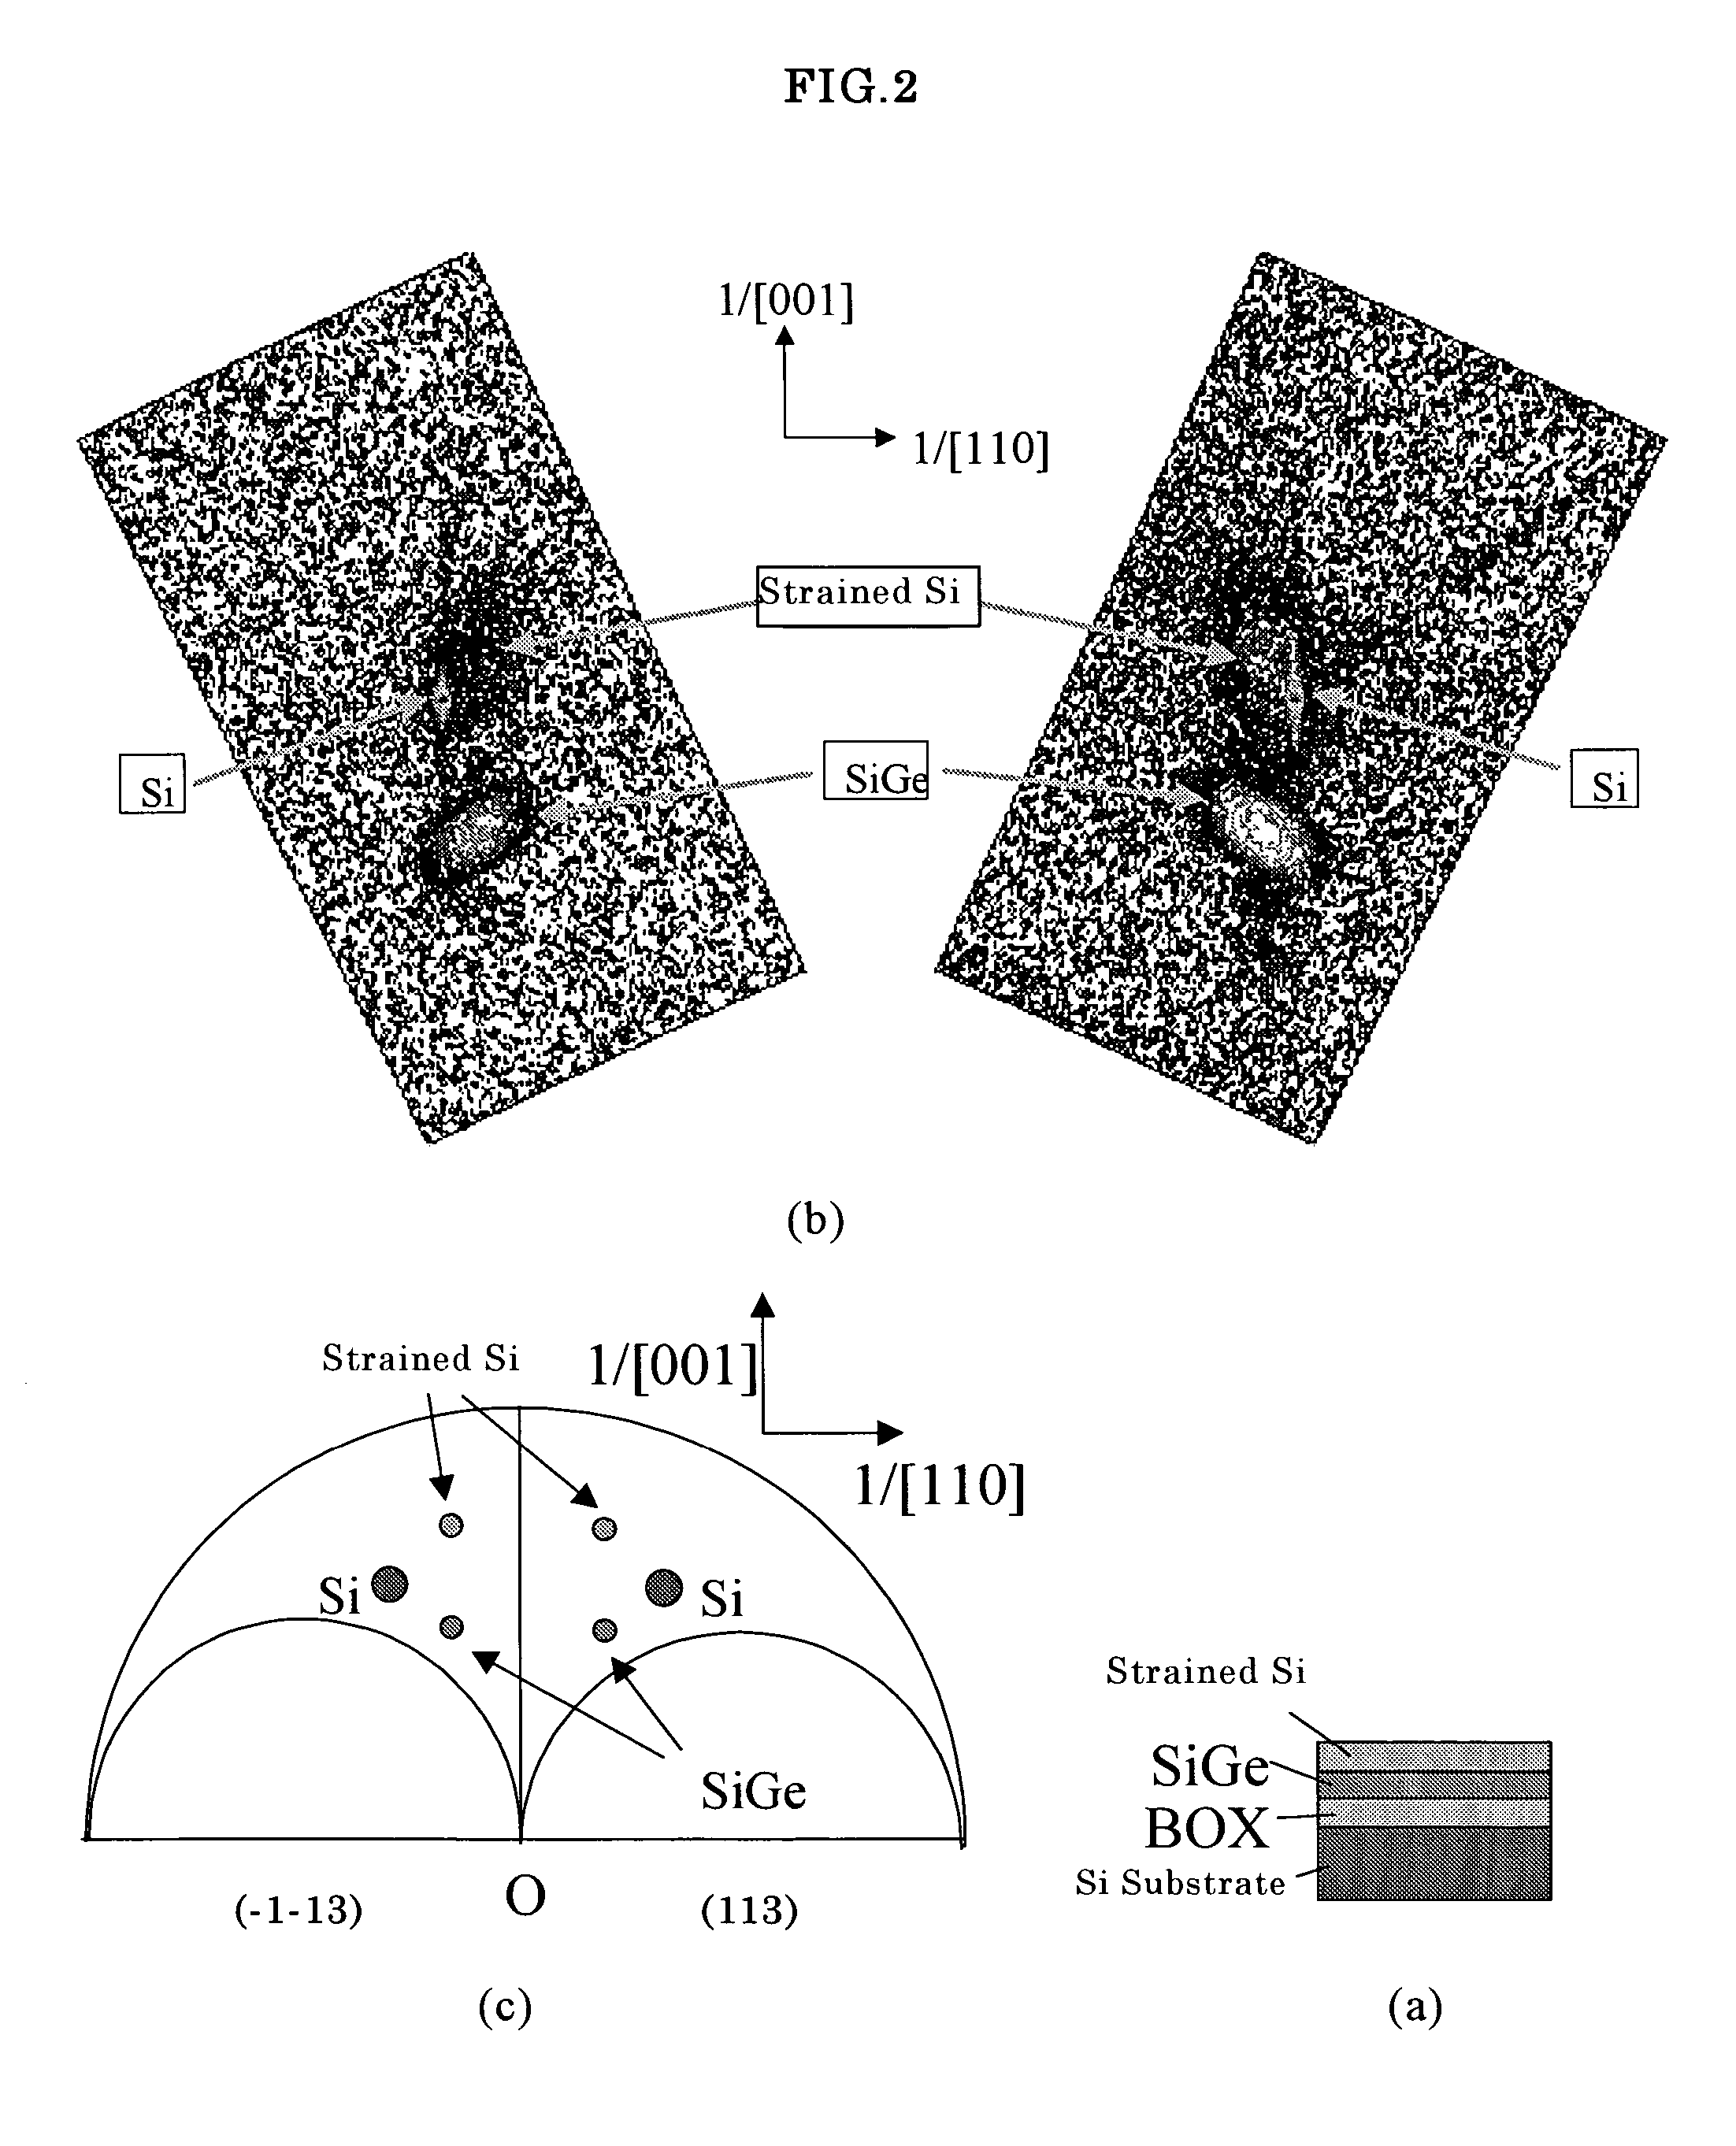 Method for measuring an amount of strain of a bonded strained wafer